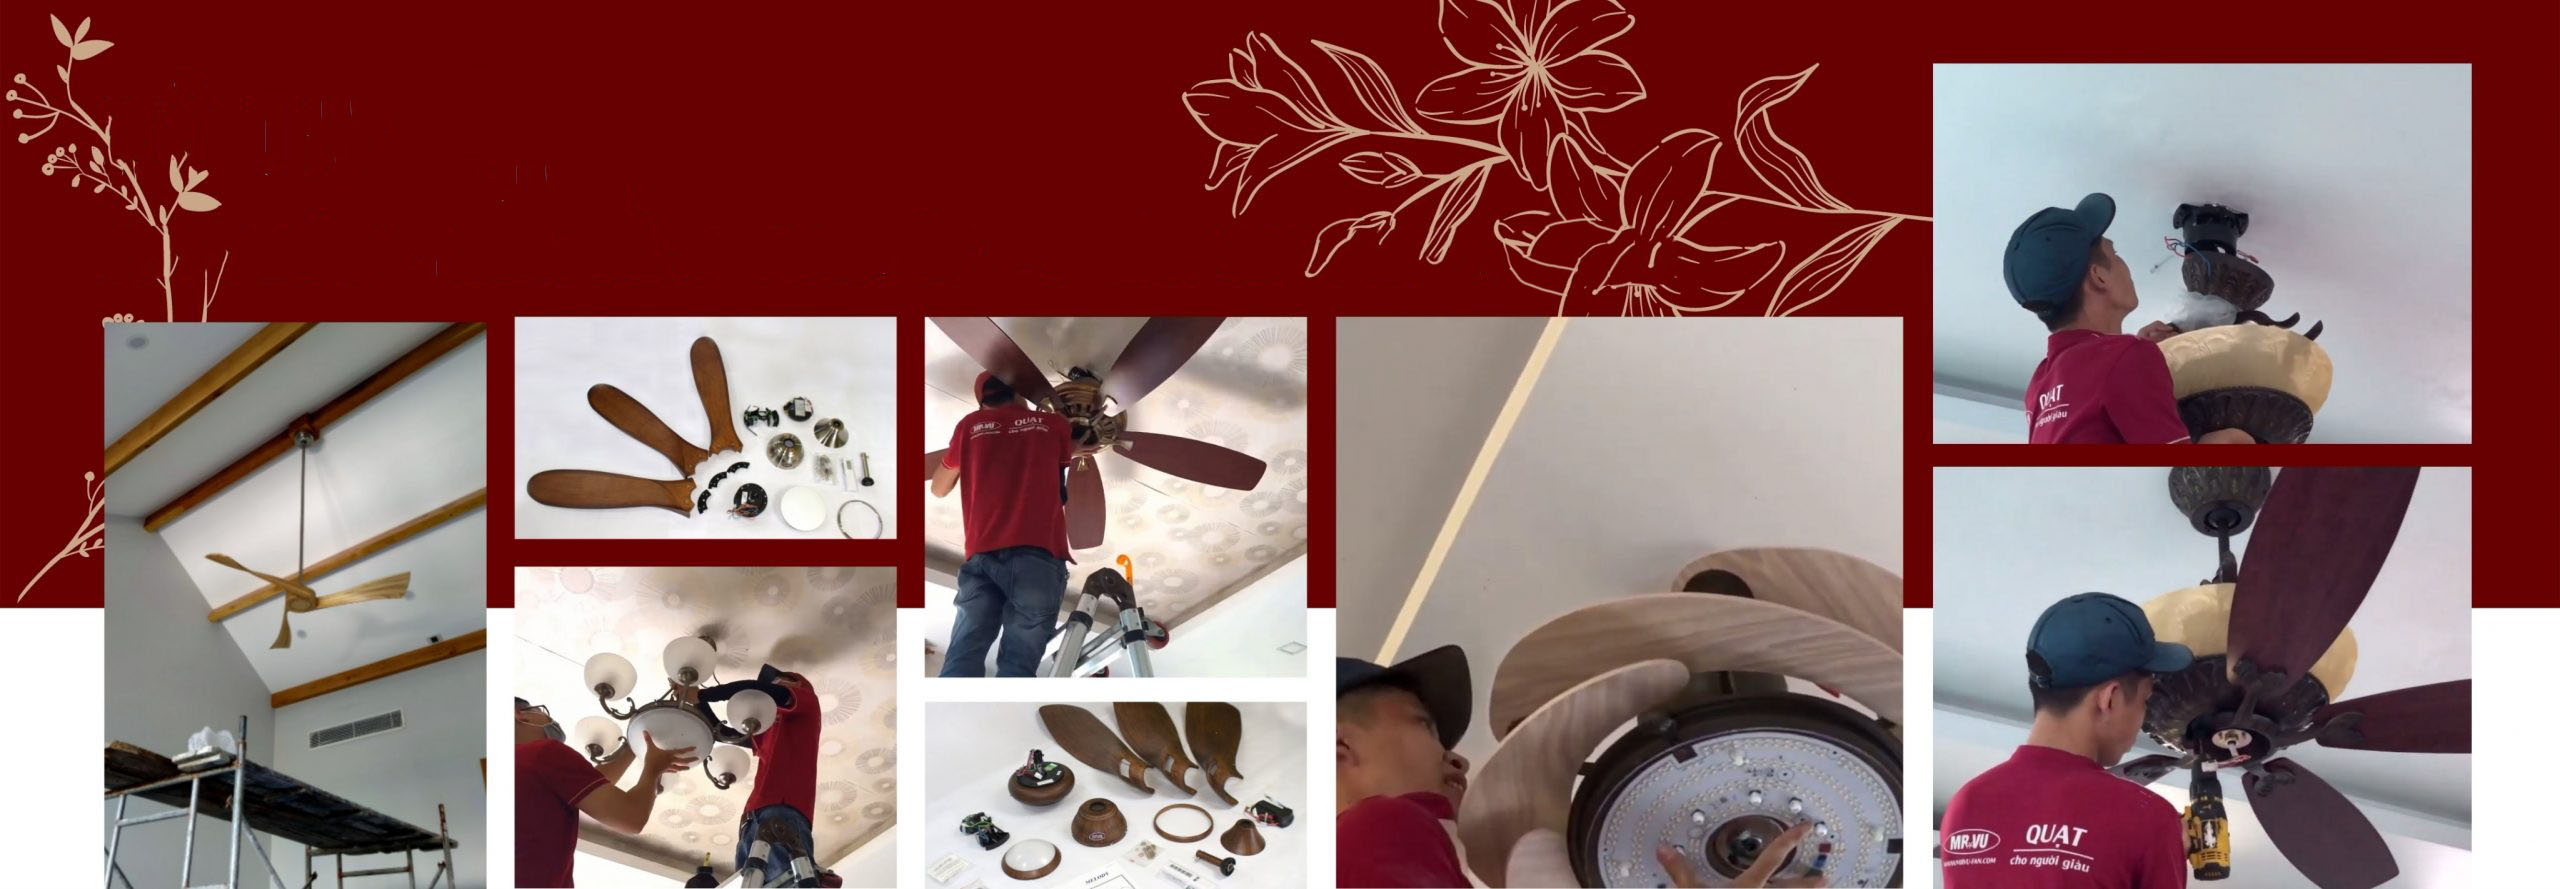 An Overview of Ceiling Fan Accidents and How to Avoid Them